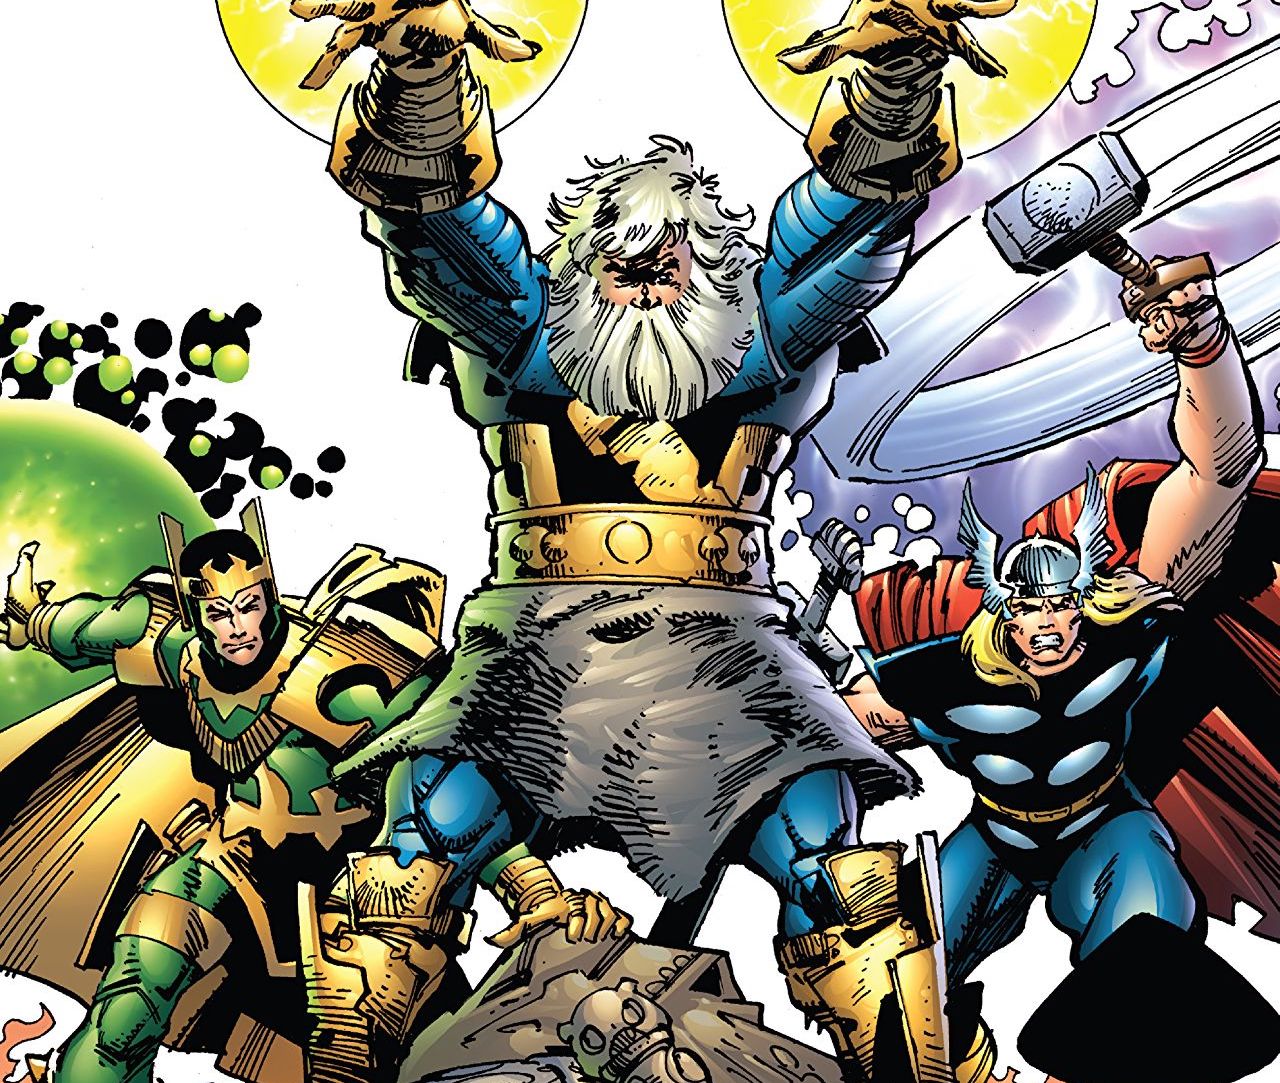 3 Reasons Why: 'Thor by Walter Simonson Vol. 2' is a great read after seeing 'Thor: Ragnarok'